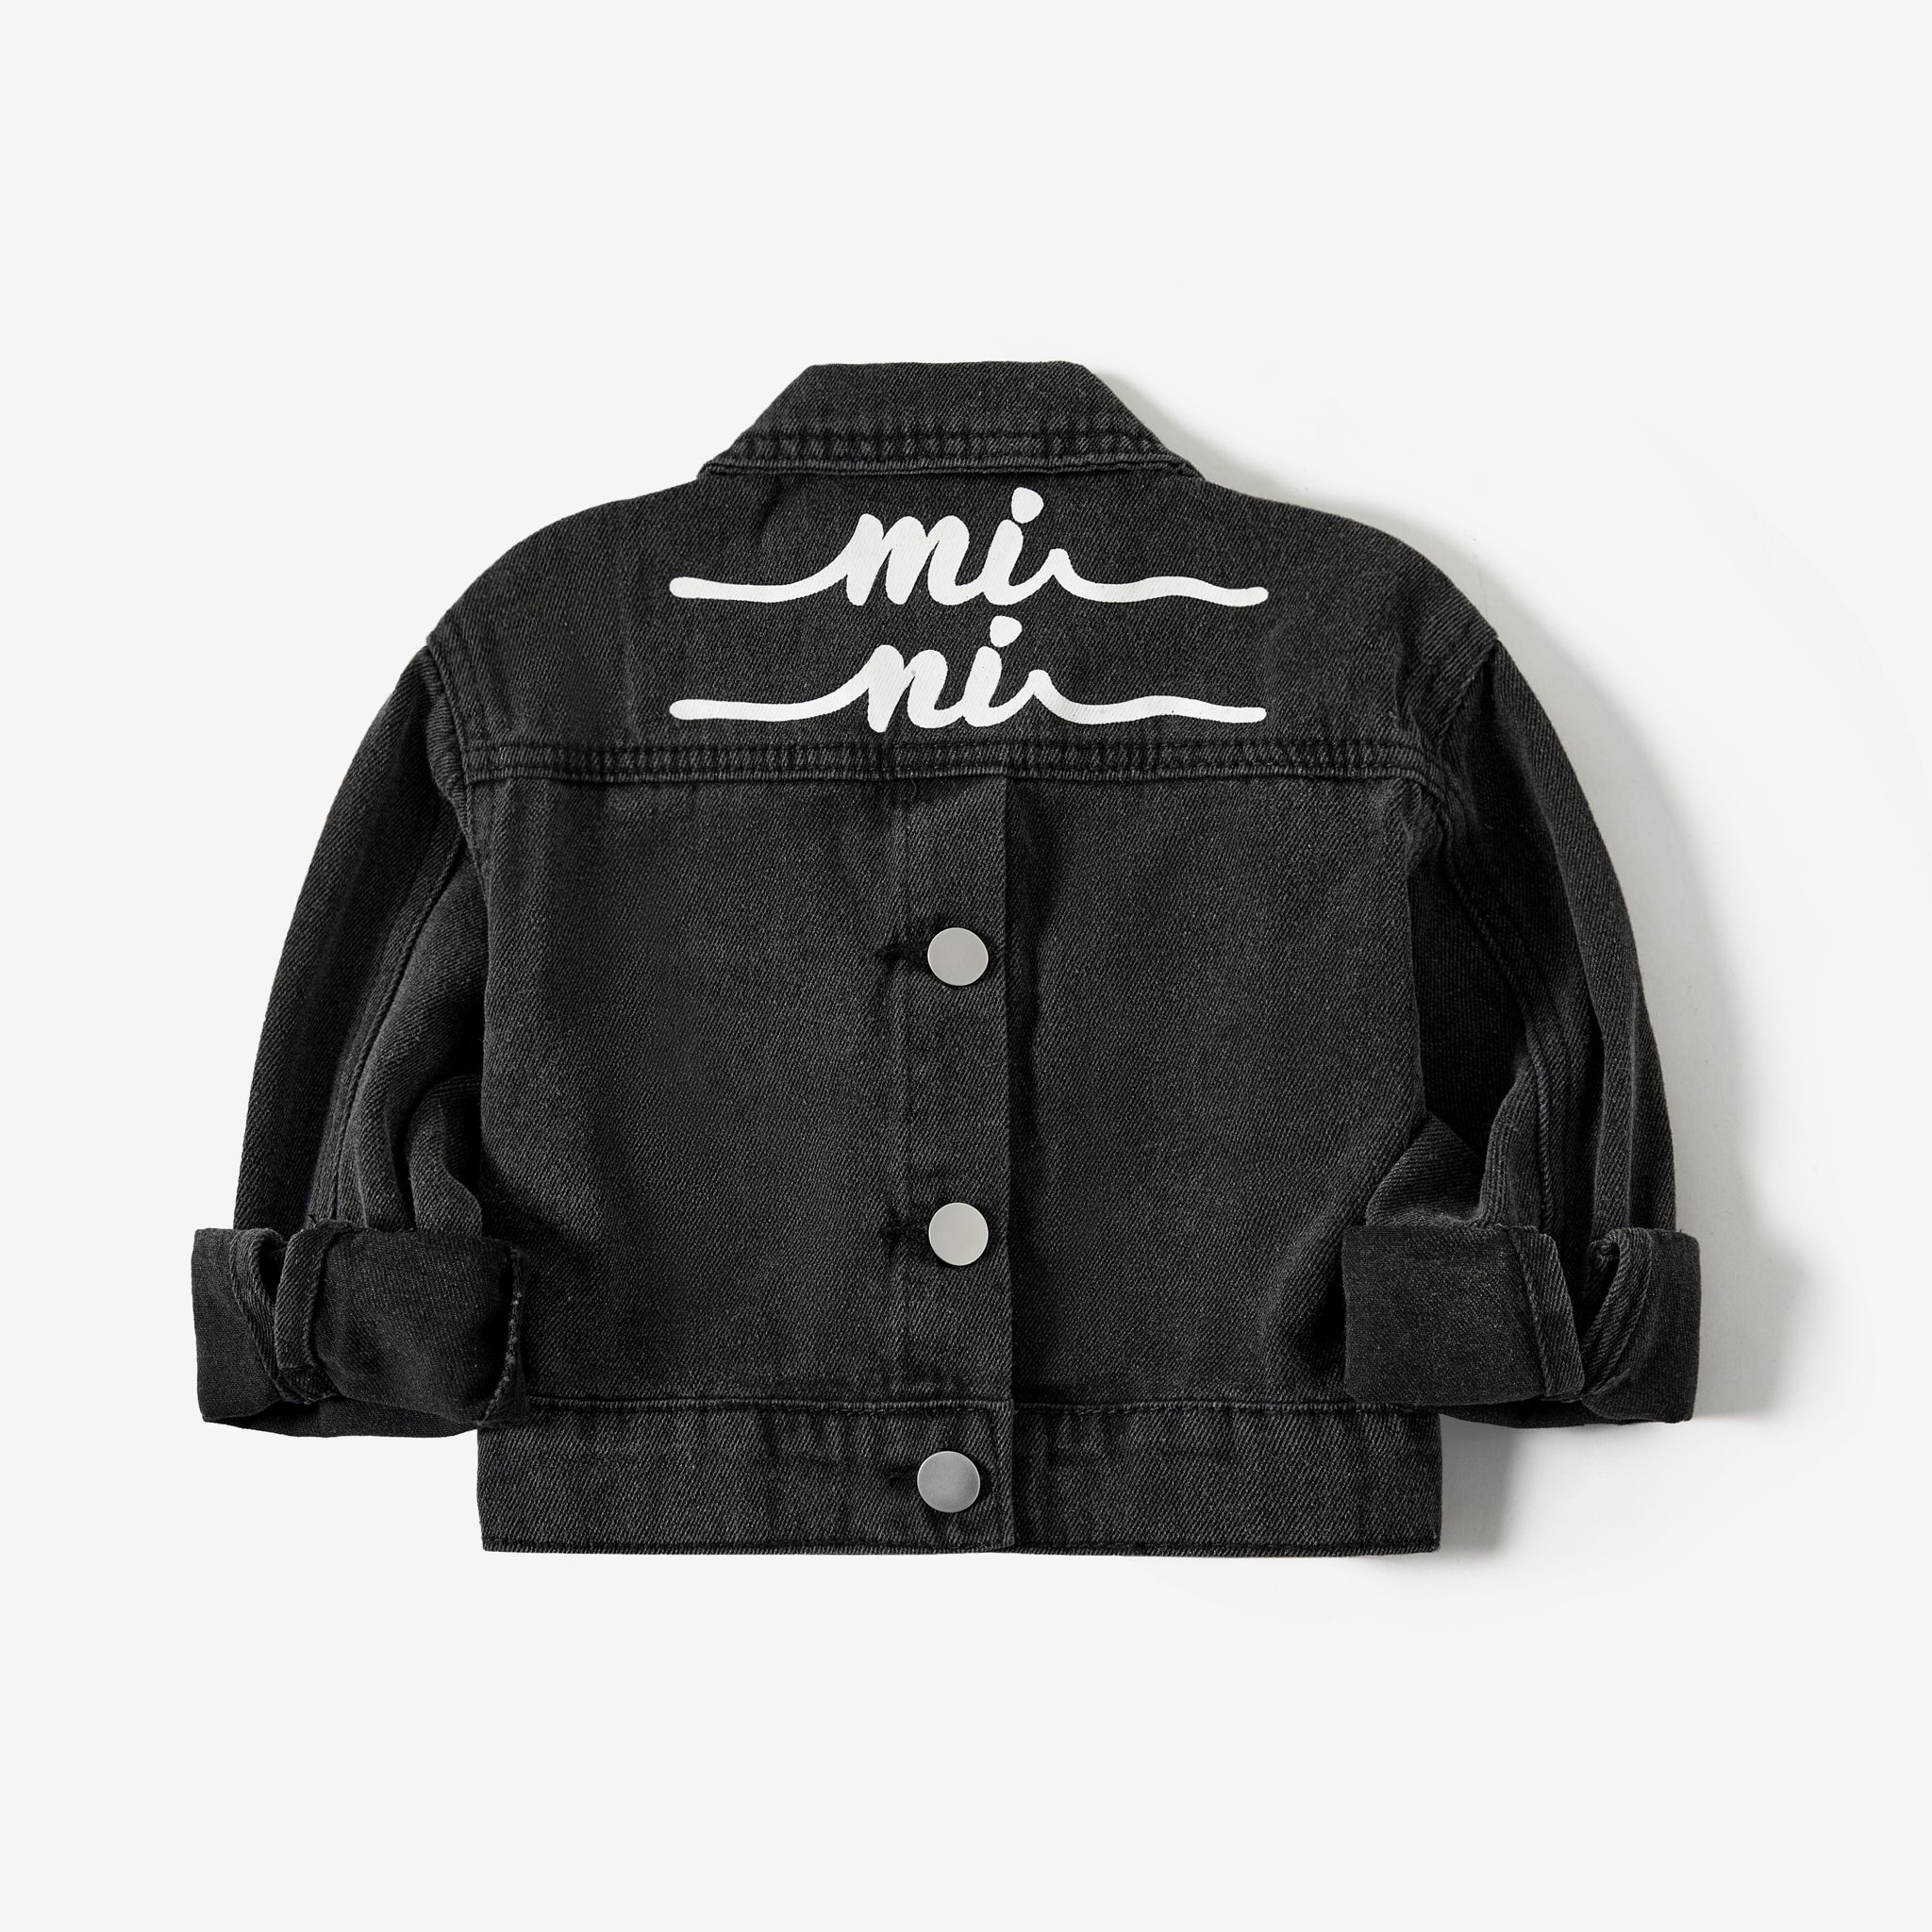 Mommy And Me Casual Letter Print Buttons & Patch Pocket Design Long-sleeve Jackets Denim Coats